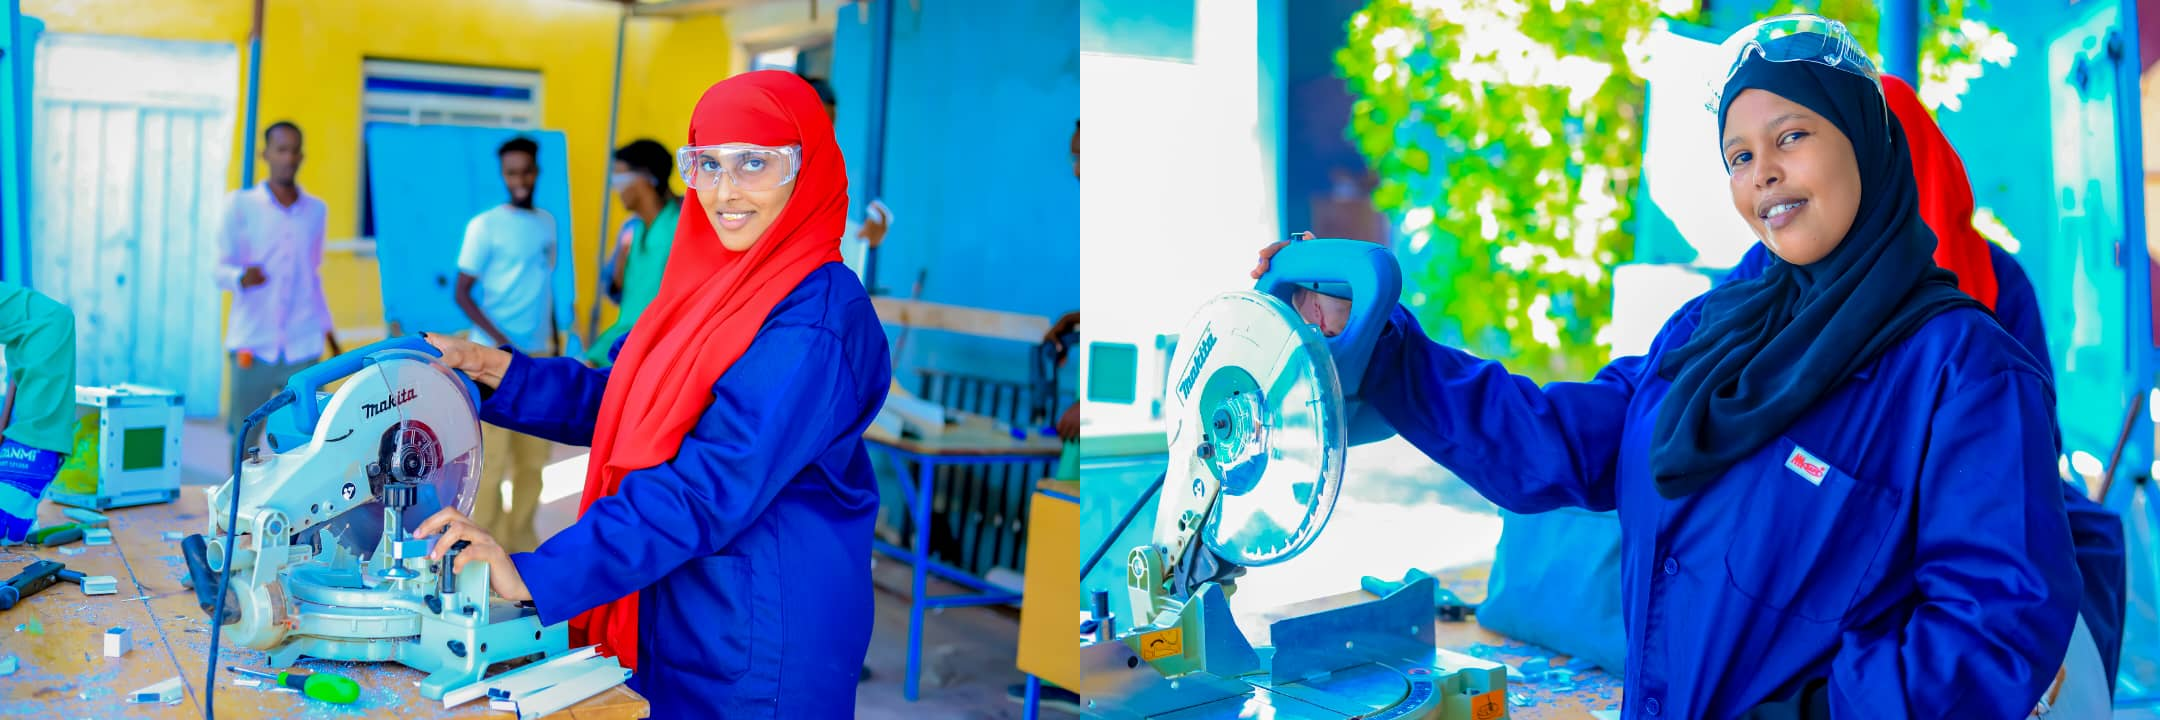 Equality in Action: Barwaaqo and Muwaahib’s Journey through Vocational Training